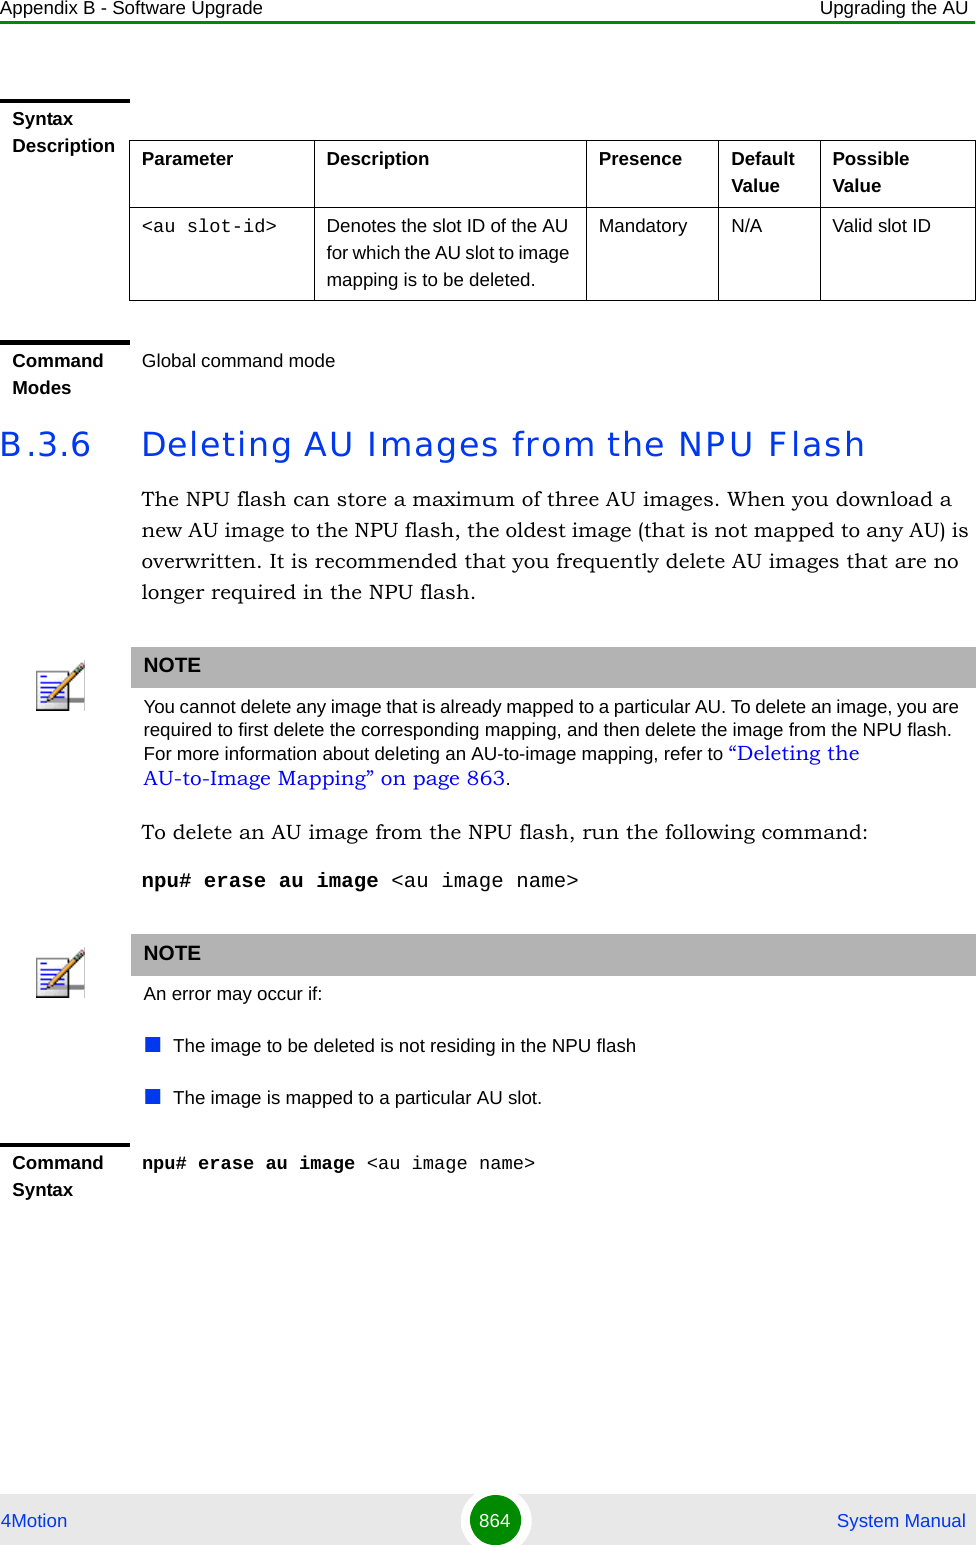 Appendix B - Software Upgrade Upgrading the AU4Motion 864  System ManualB.3.6 Deleting AU Images from the NPU FlashThe NPU flash can store a maximum of three AU images. When you download a new AU image to the NPU flash, the oldest image (that is not mapped to any AU) is overwritten. It is recommended that you frequently delete AU images that are no longer required in the NPU flash.To delete an AU image from the NPU flash, run the following command:npu# erase au image &lt;au image name&gt;Syntax Description Parameter Description Presence Default ValuePossible Value&lt;au slot-id&gt; Denotes the slot ID of the AU for which the AU slot to image mapping is to be deleted.Mandatory N/A Valid slot IDCommand ModesGlobal command modeNOTEYou cannot delete any image that is already mapped to a particular AU. To delete an image, you are required to first delete the corresponding mapping, and then delete the image from the NPU flash. For more information about deleting an AU-to-image mapping, refer to “Deleting the AU-to-Image Mapping” on page 863.NOTEAn error may occur if:The image to be deleted is not residing in the NPU flashThe image is mapped to a particular AU slot.Command Syntaxnpu# erase au image &lt;au image name&gt;